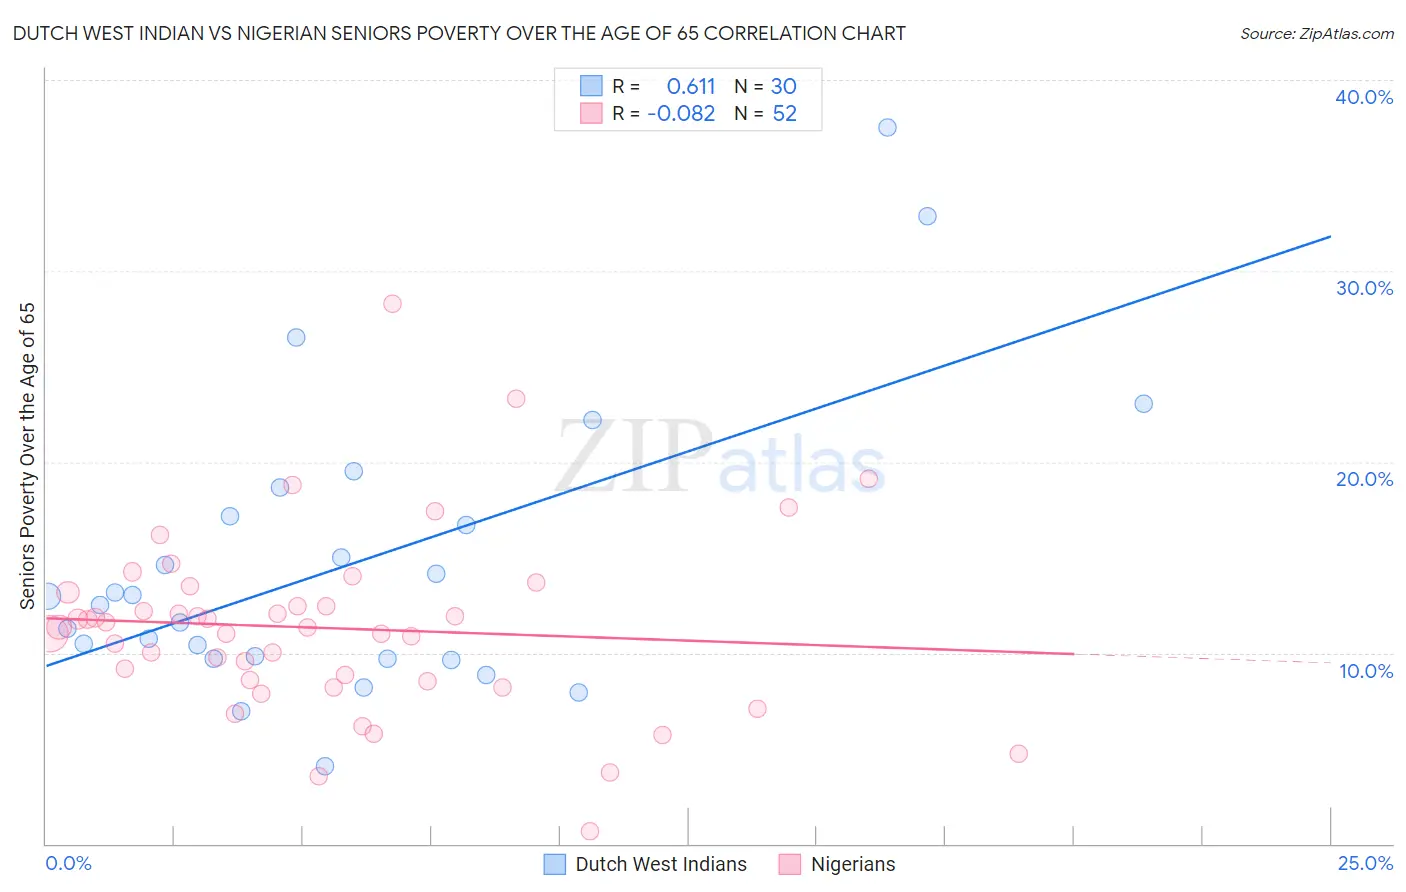 Dutch West Indian vs Nigerian Seniors Poverty Over the Age of 65